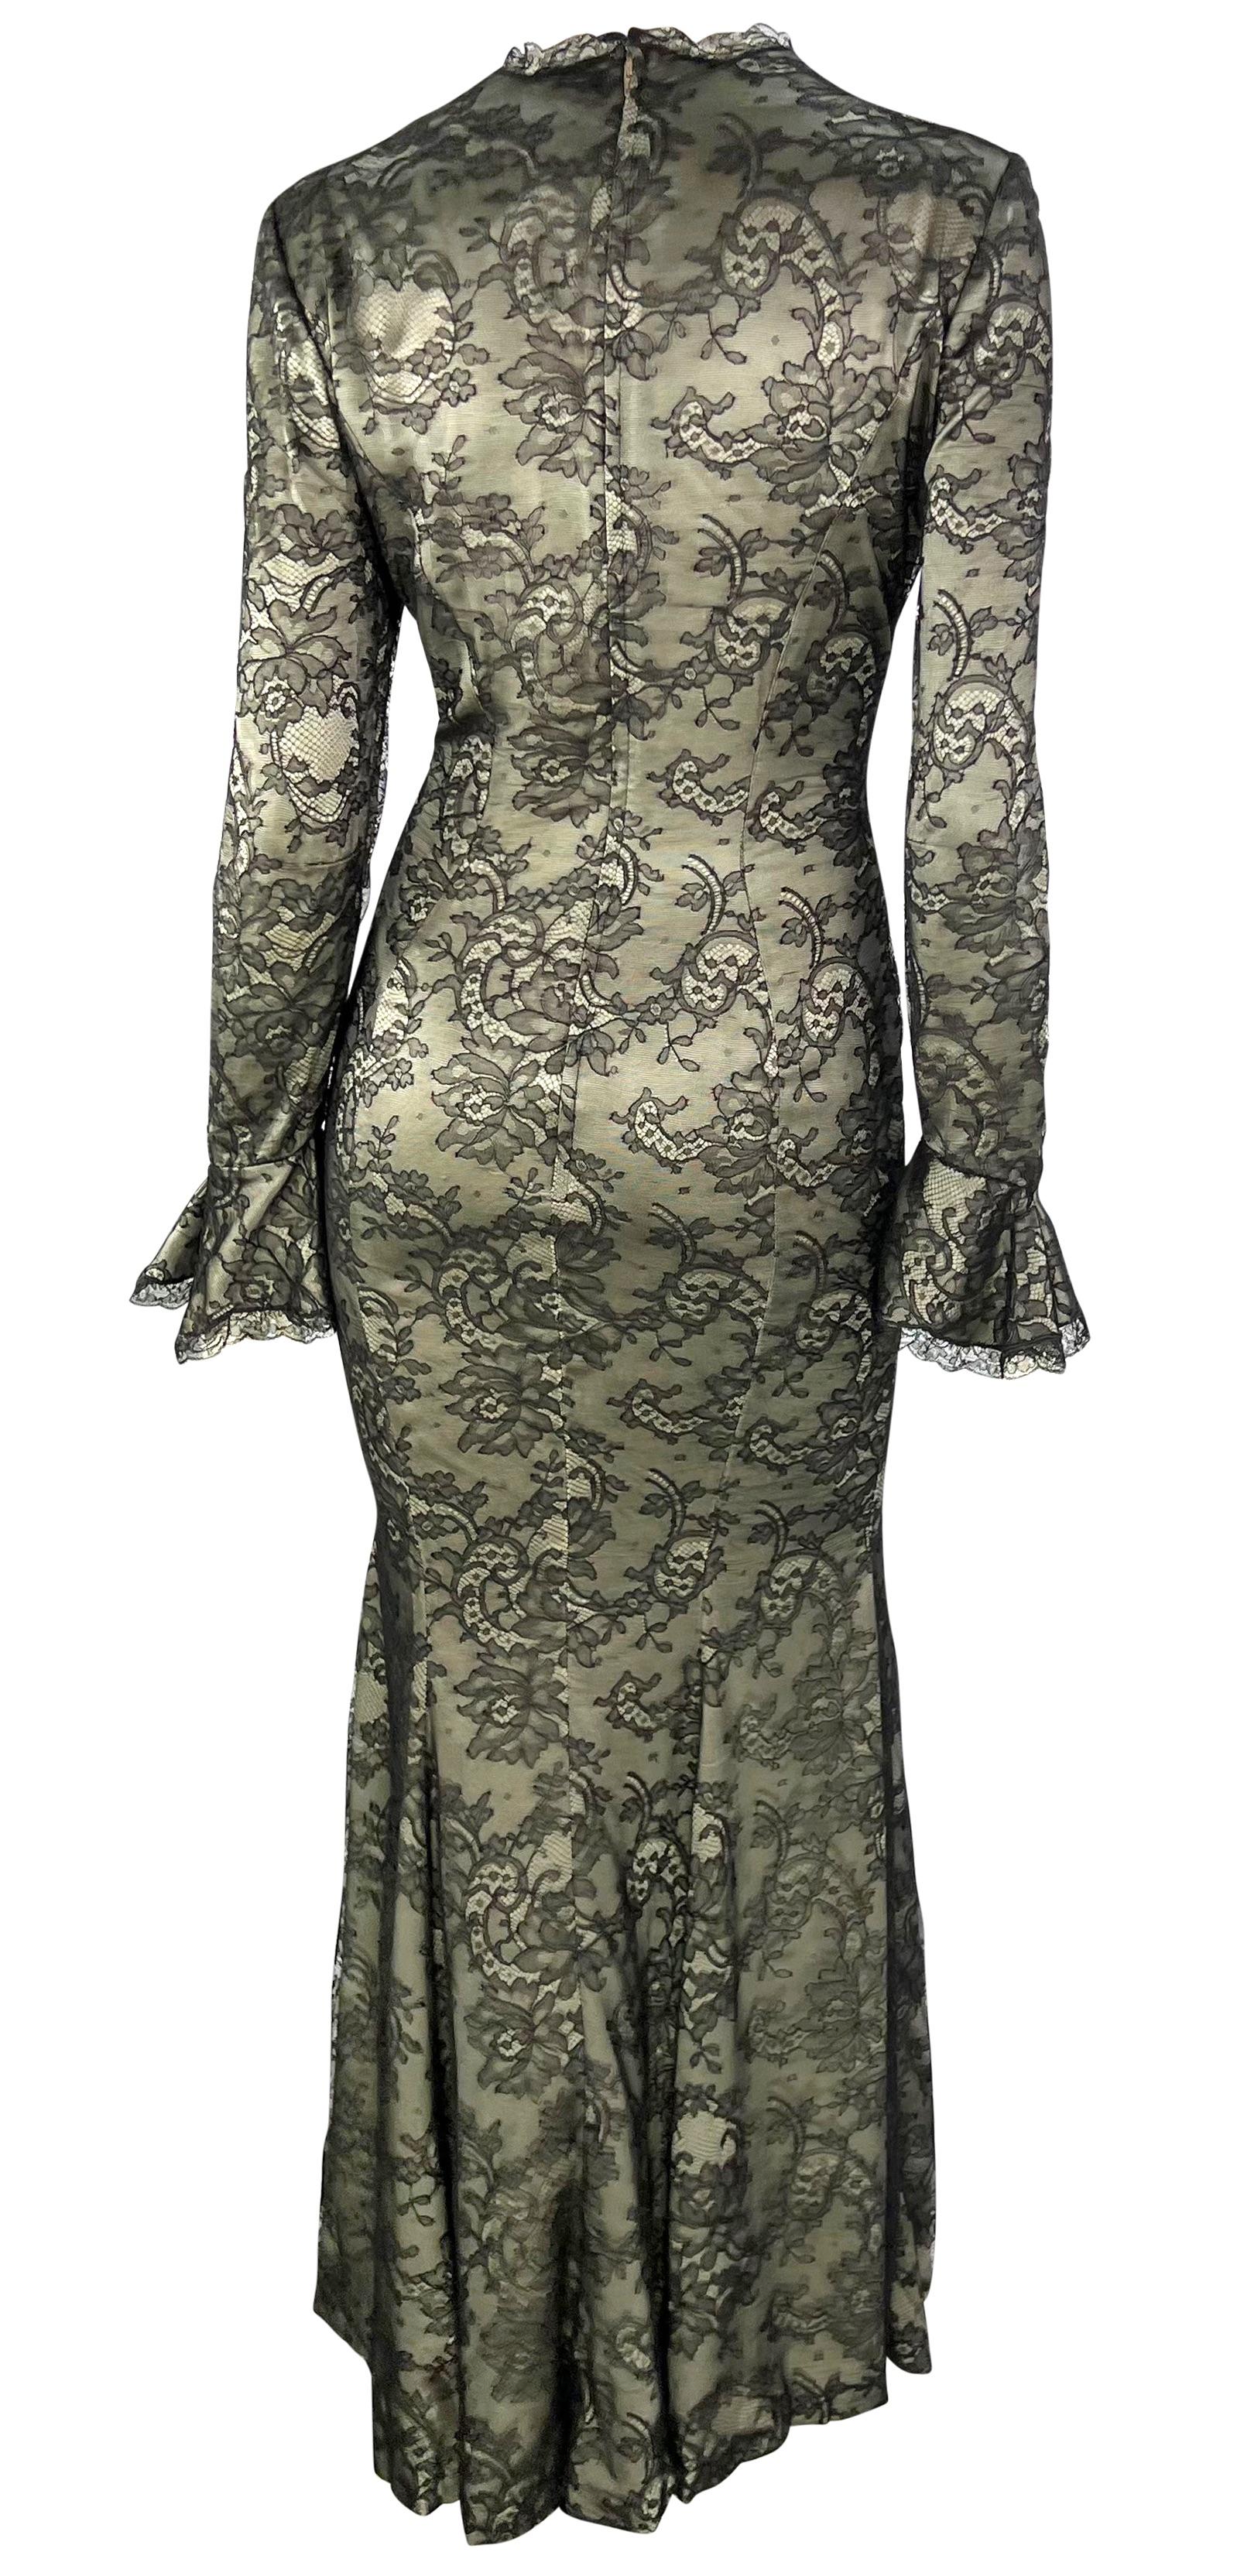 S/S 1995 Thierry Mugler Plunging Taupe Satin Black Floral Lace Overlay Gown For Sale 1